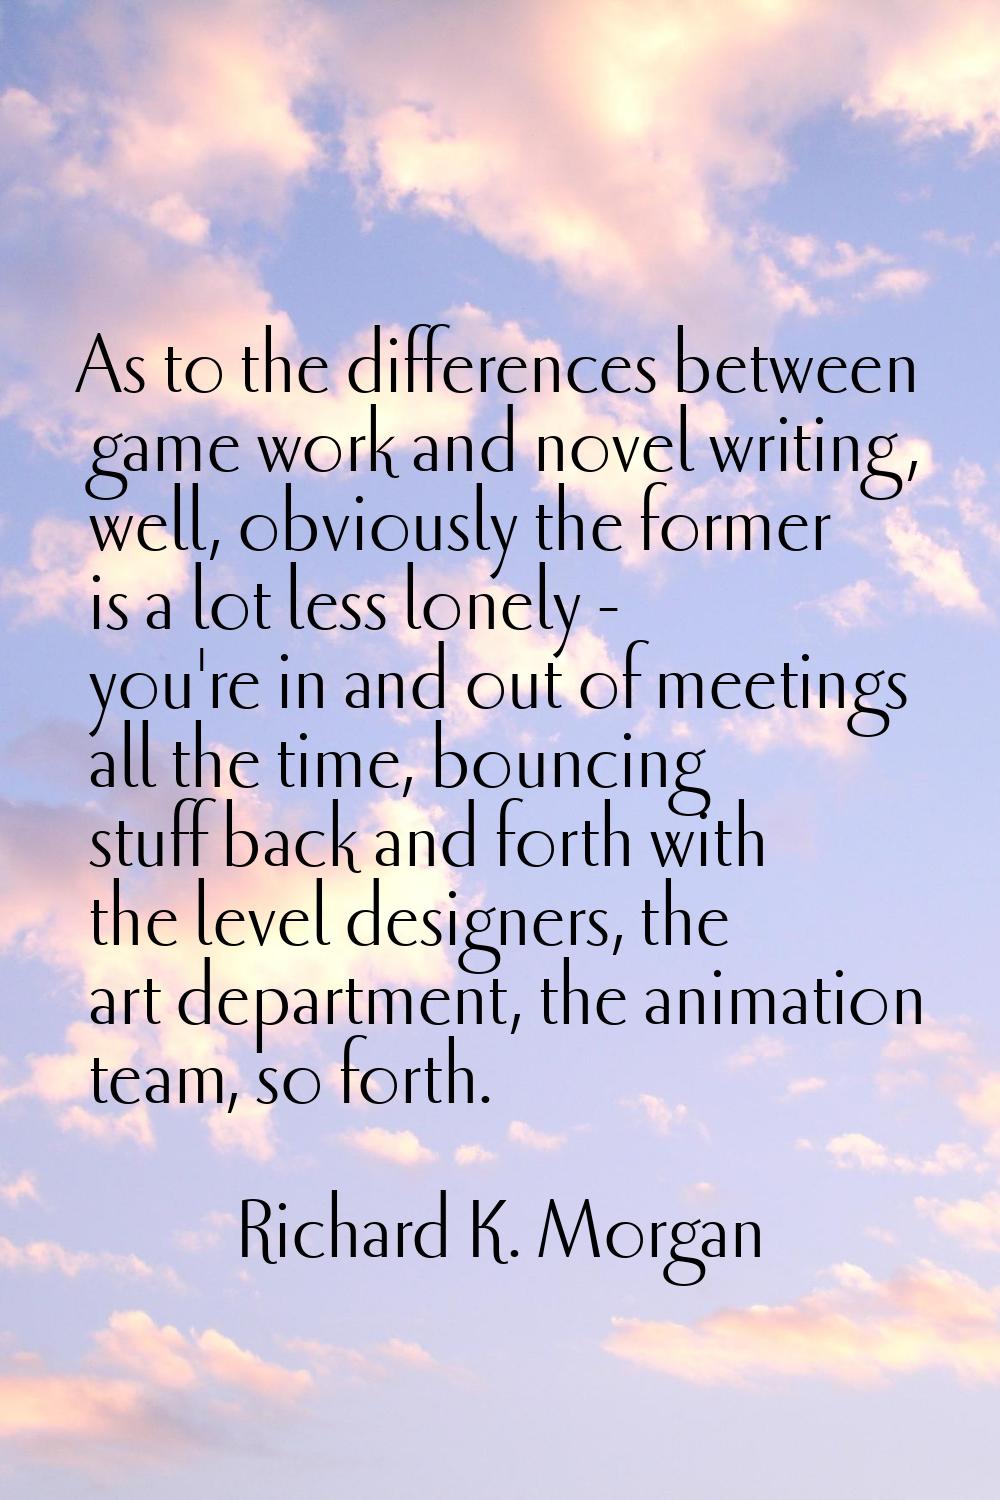 As to the differences between game work and novel writing, well, obviously the former is a lot less